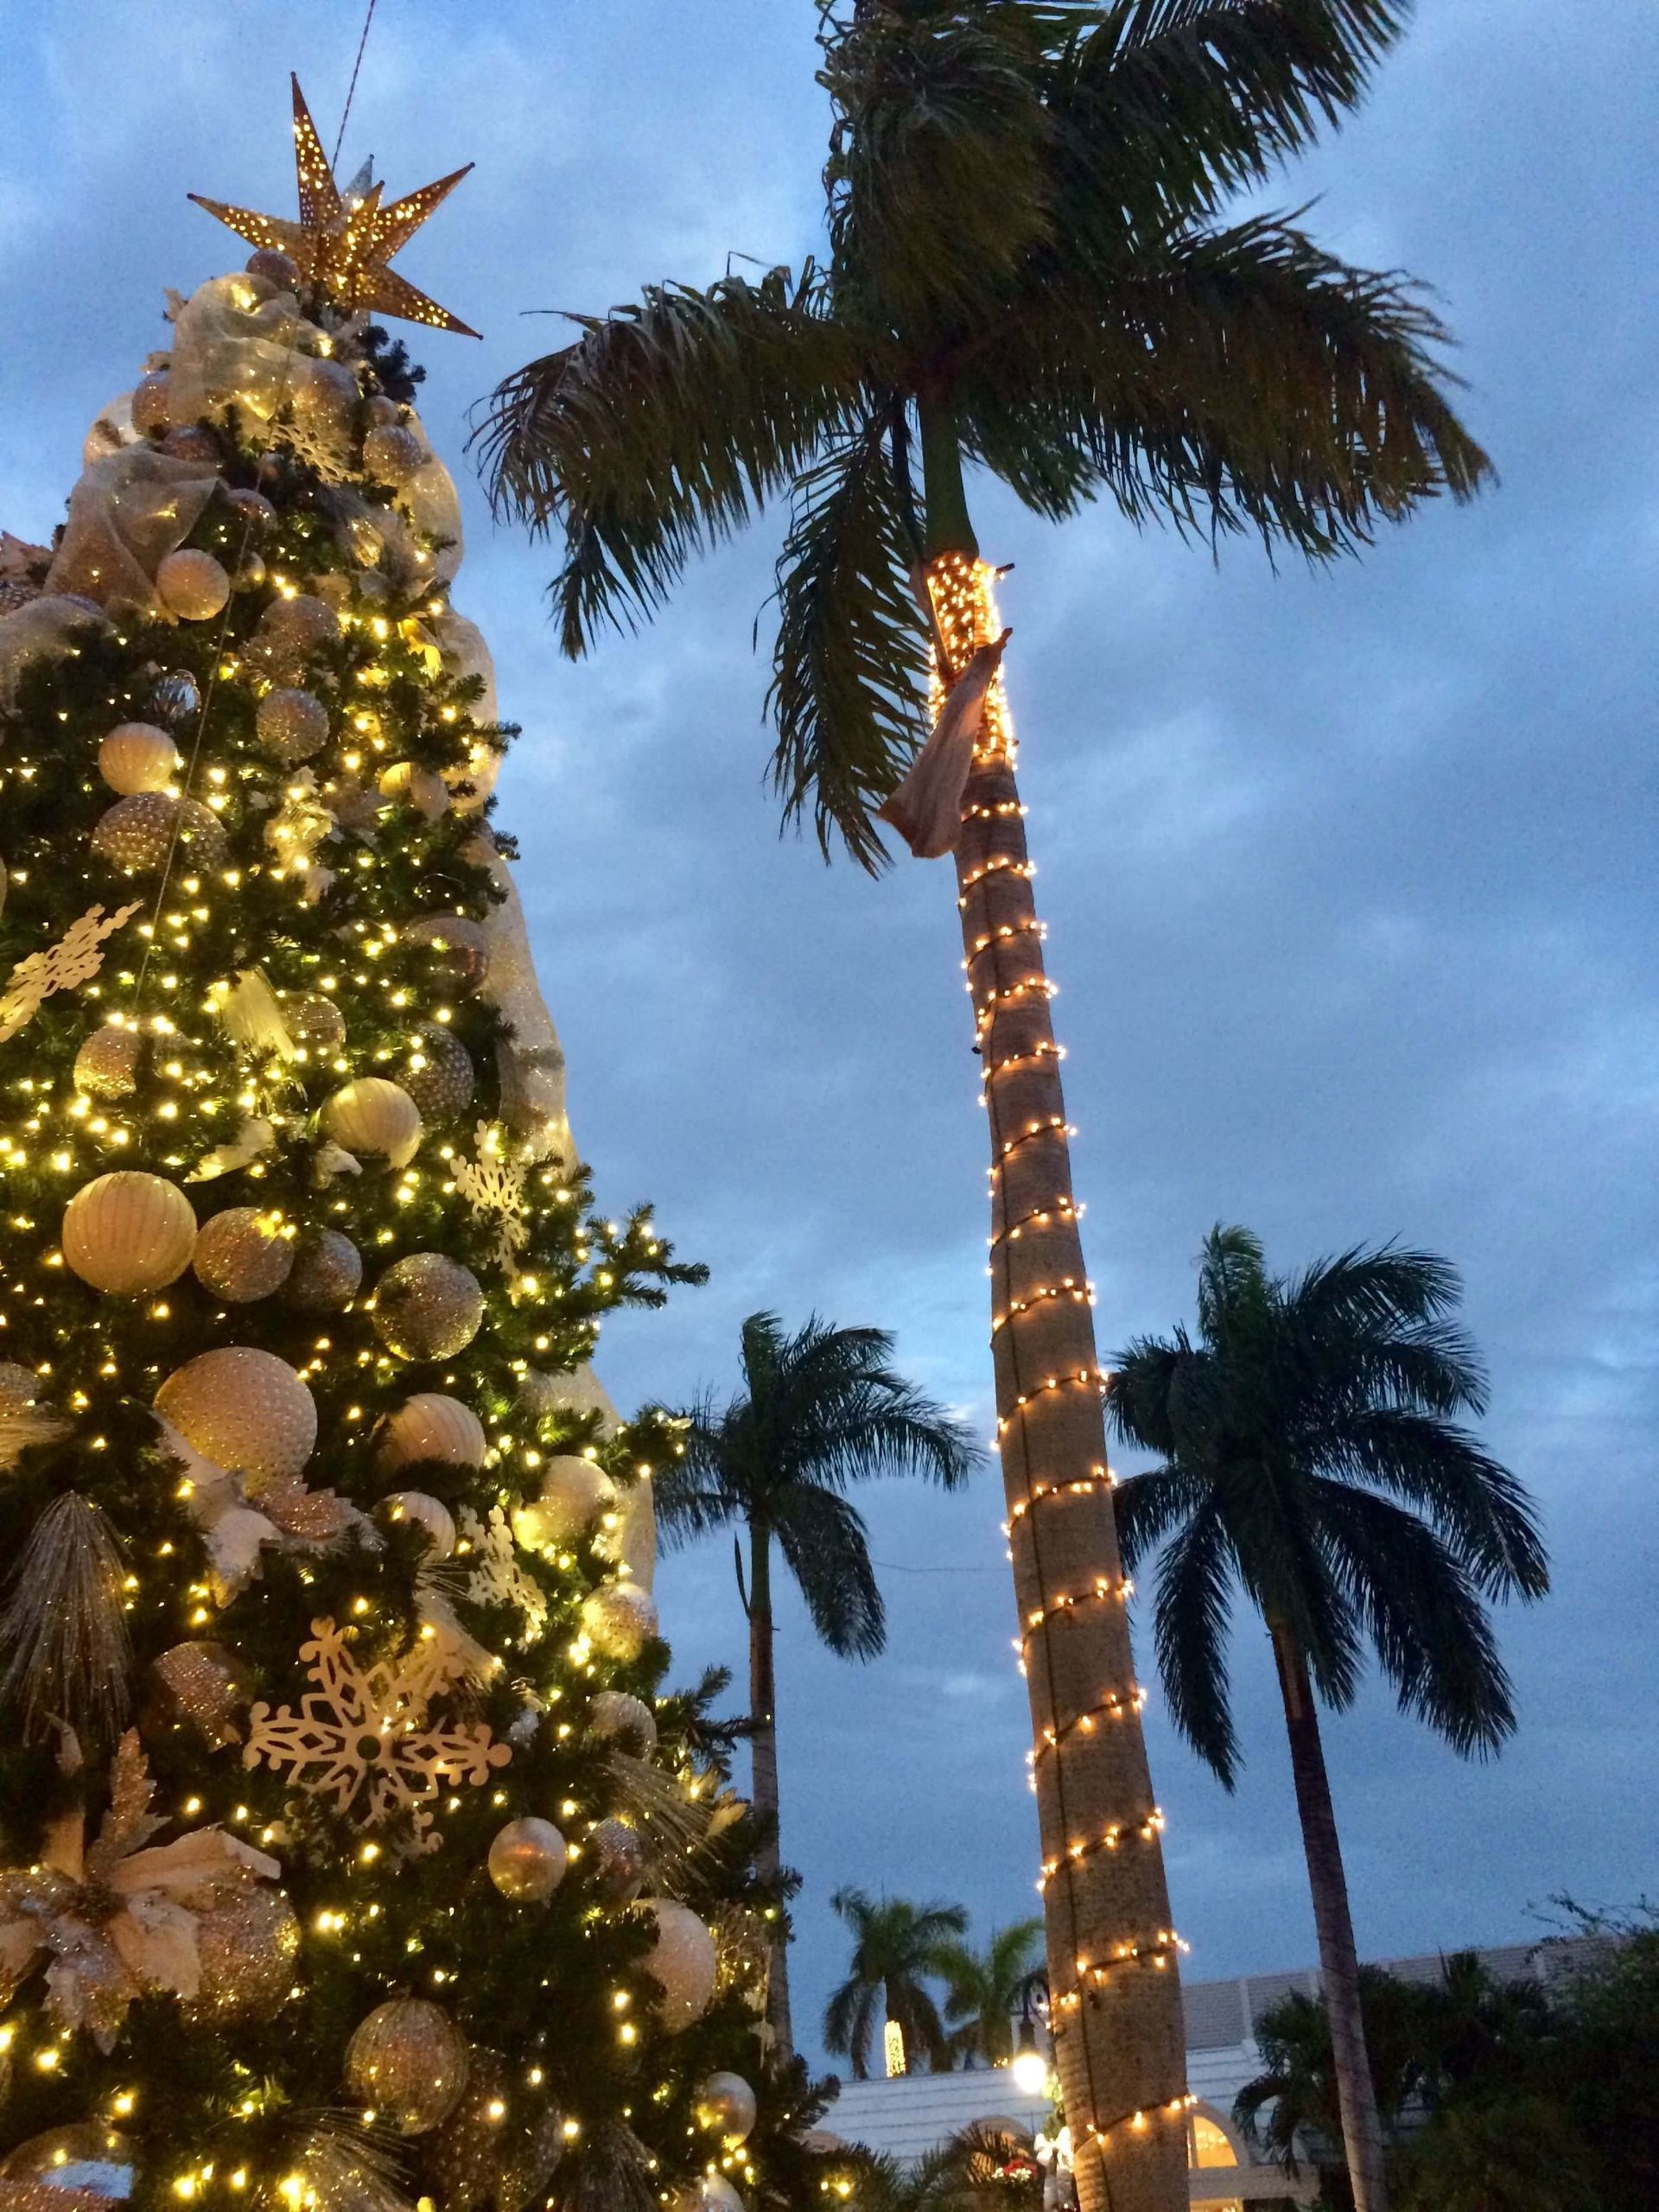 Christmas lights installed on a christmas tree and a palm tree in Boca Raton, FL